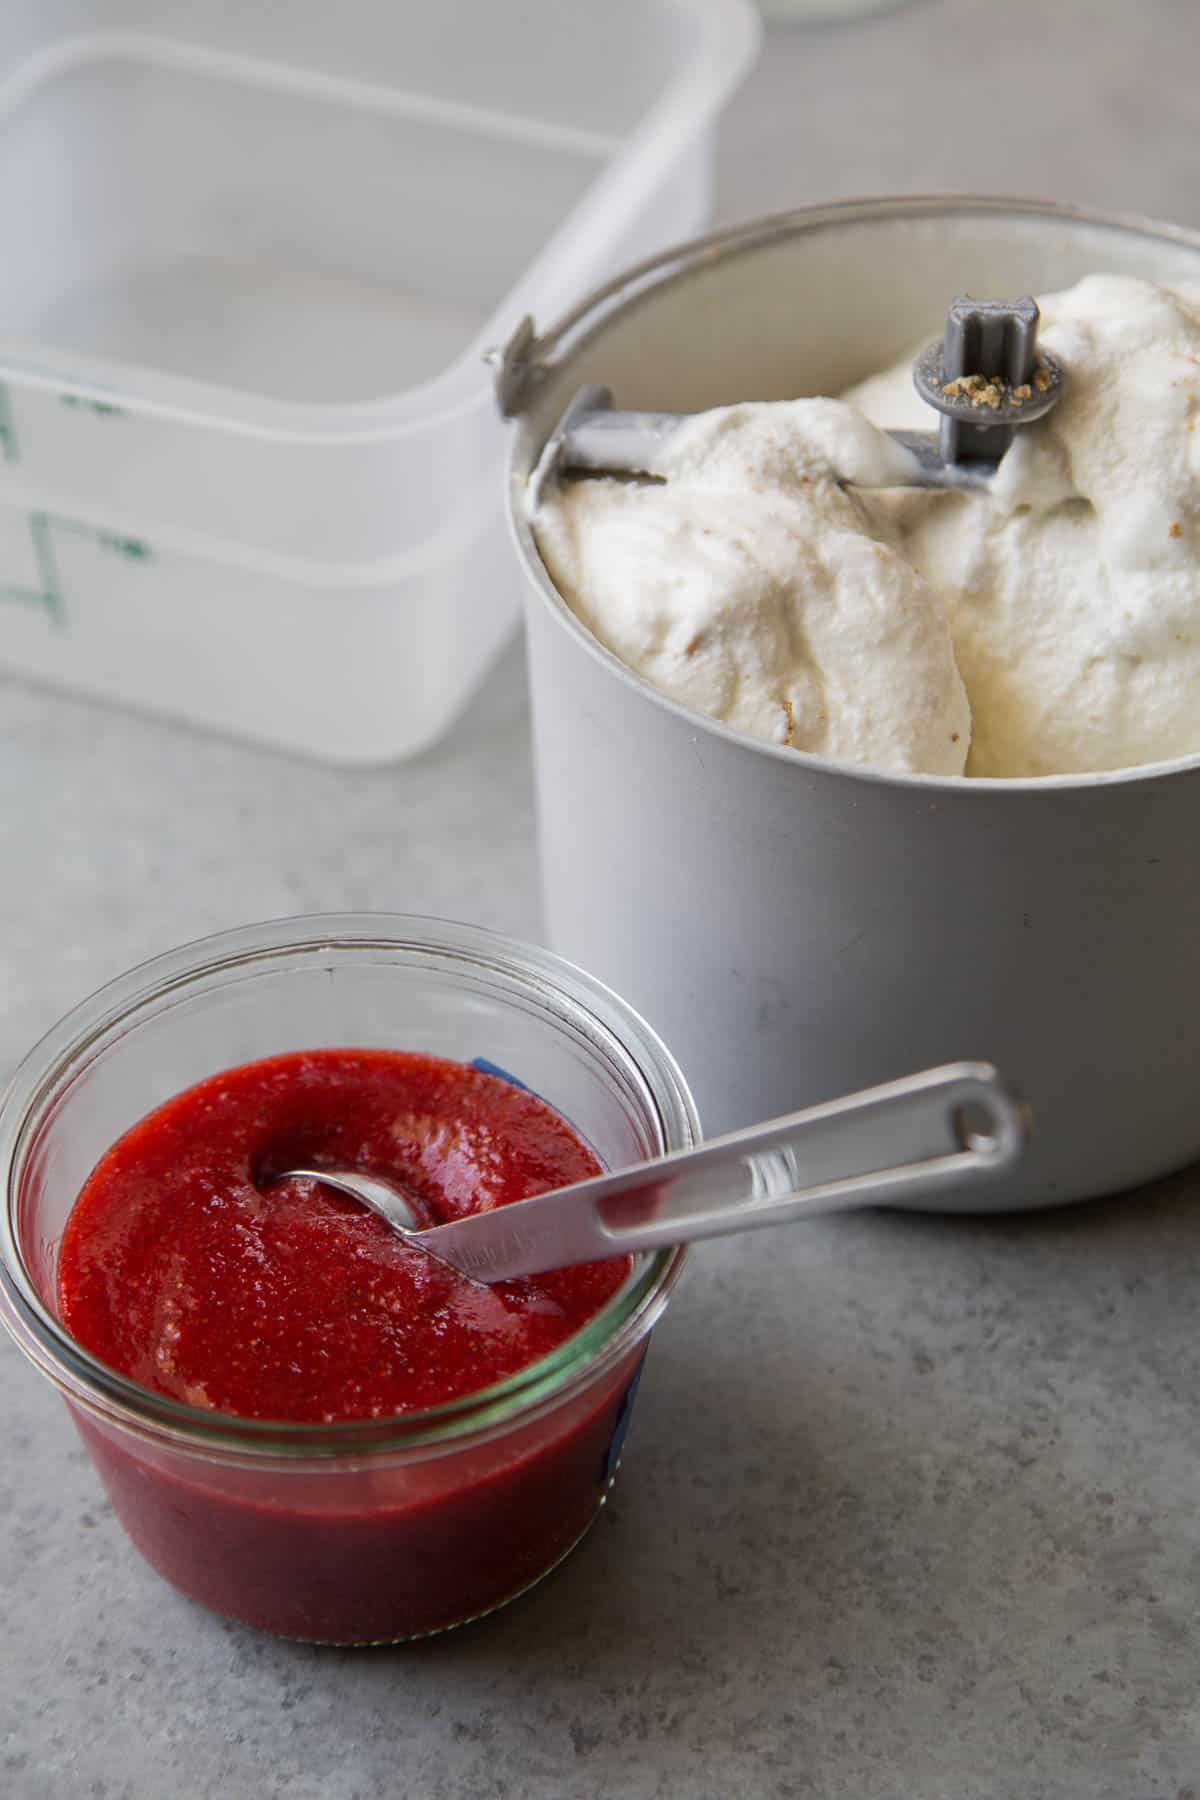 alternate adding layers of strawberry sauce and cheesecake ice cream in freezer safe container.